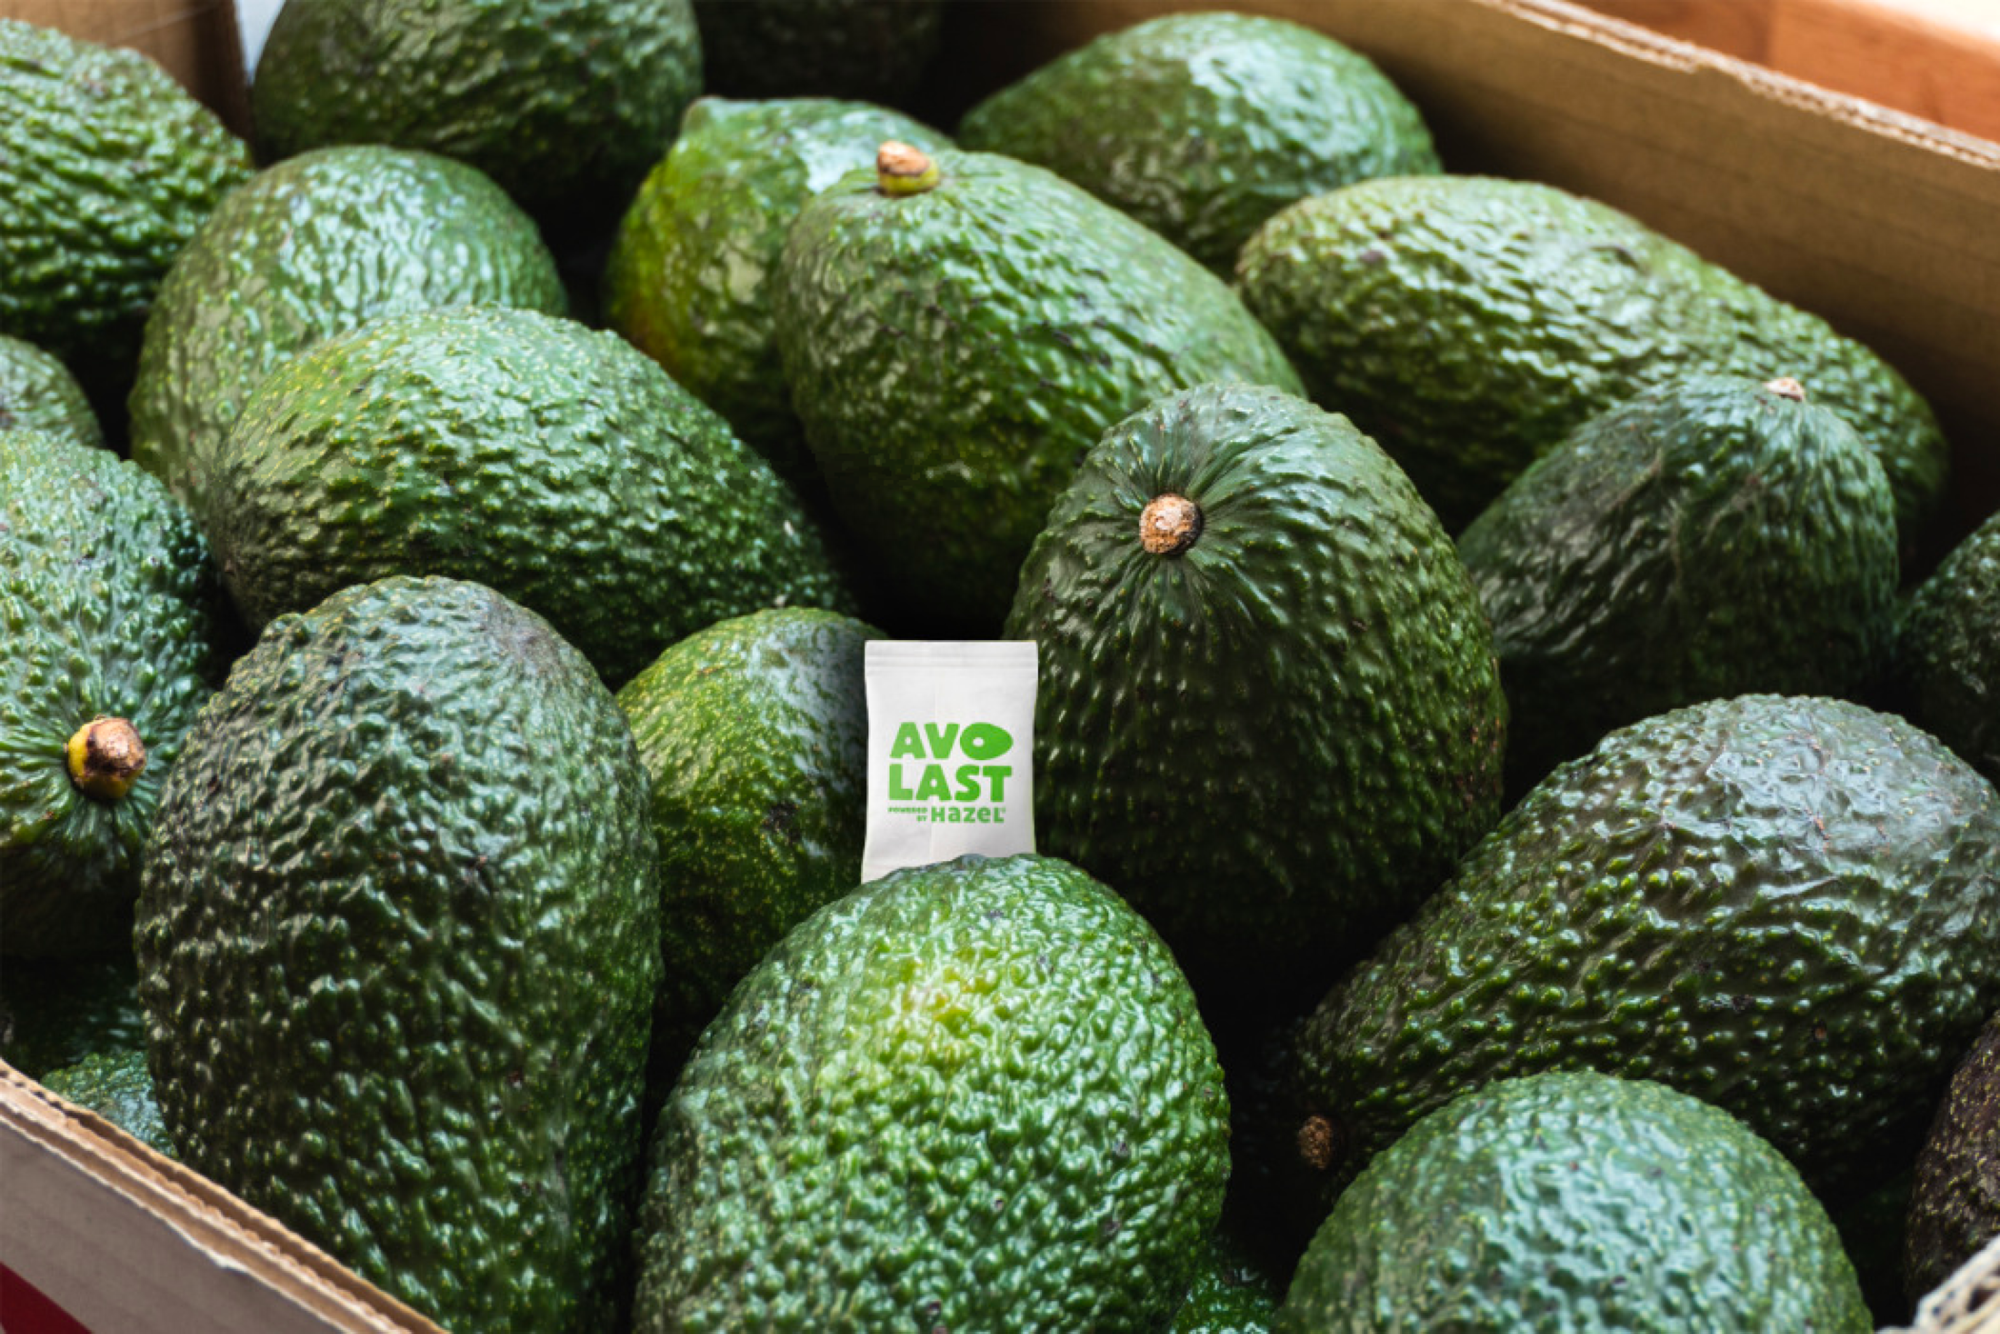 Using science to help avocados stay fresh - American Chemical Society